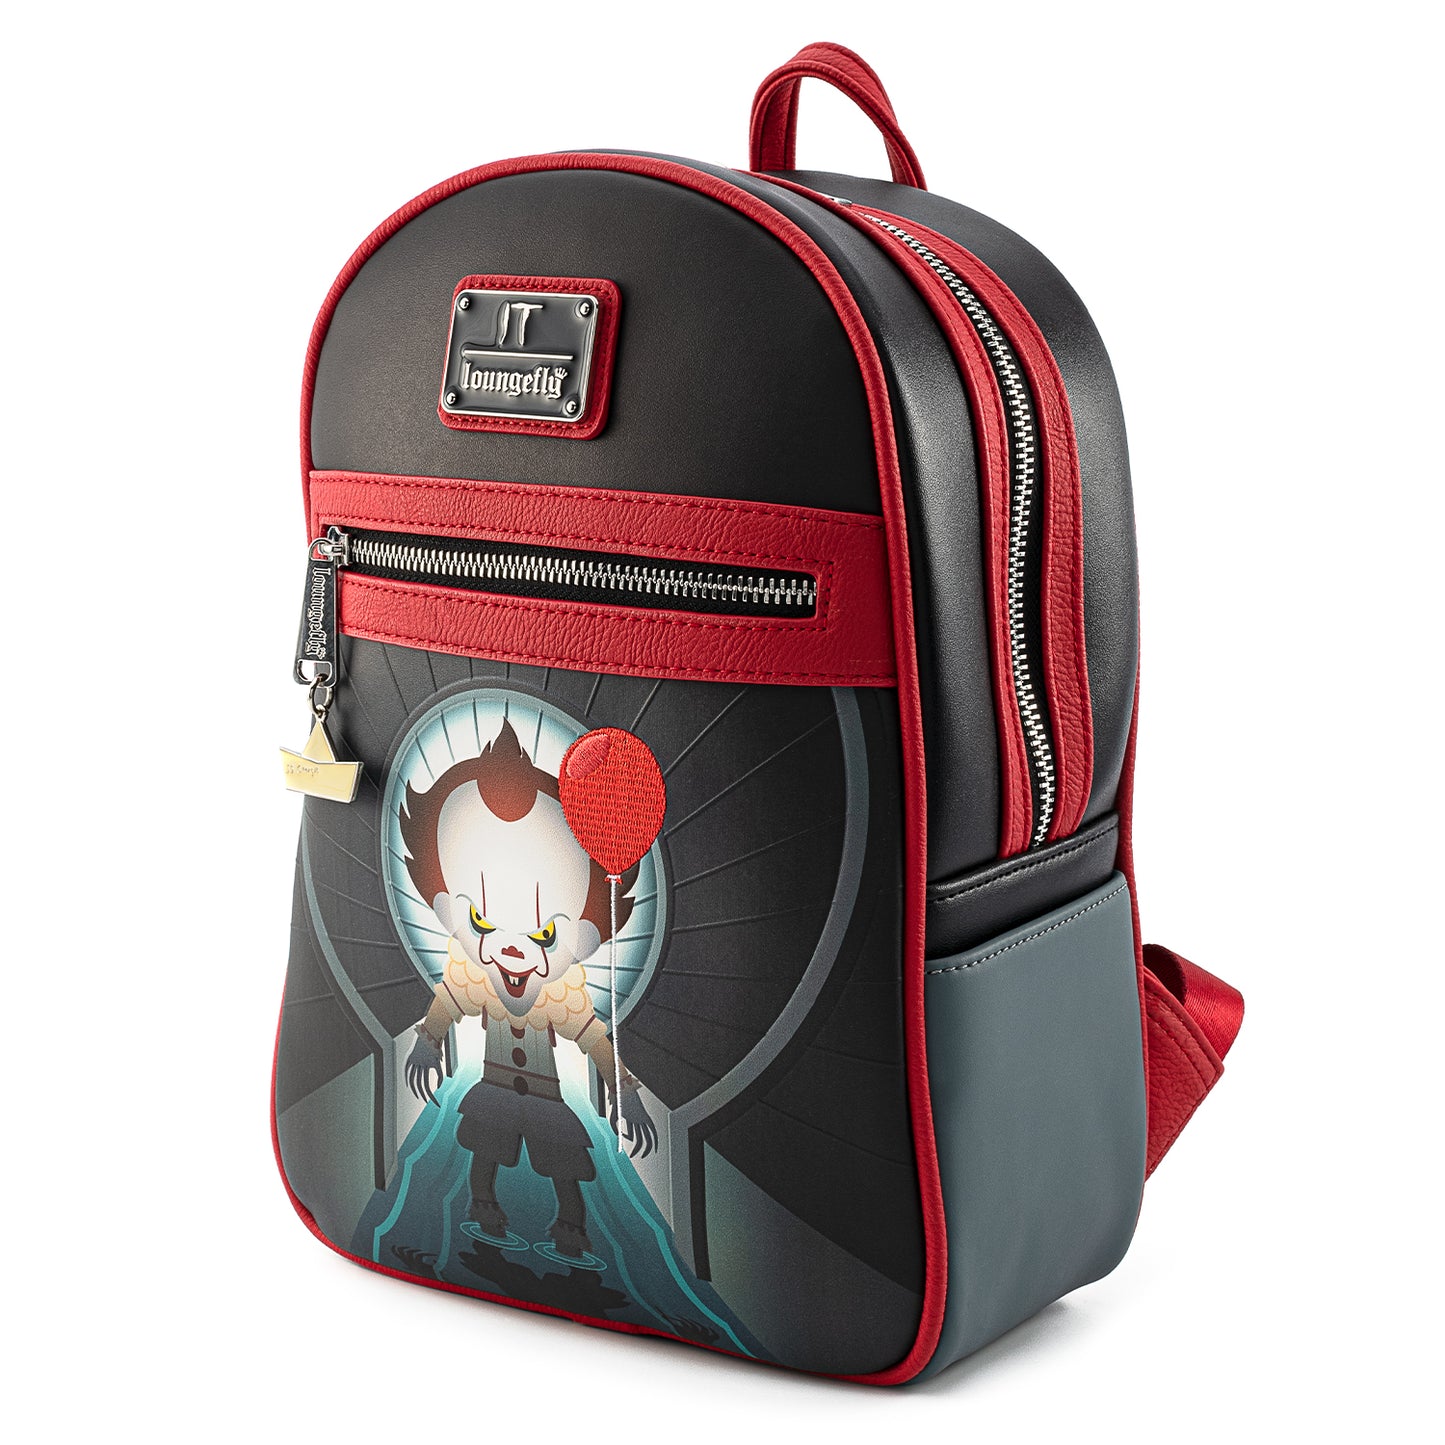 IT x Loungefly Sewer Scene Pennywise Mini Backpack